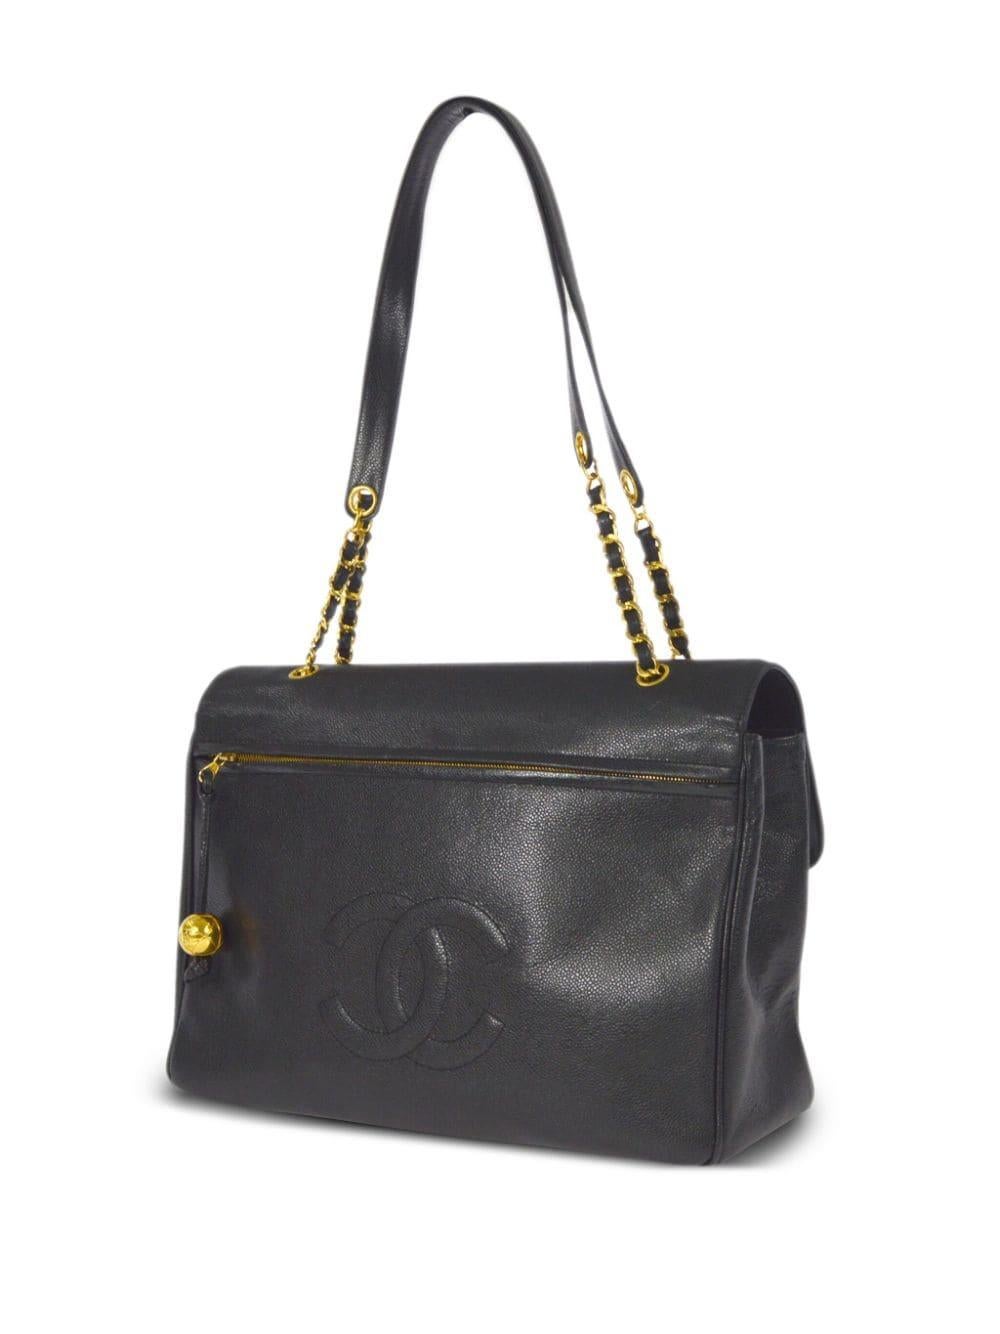 Chanel XL Classic Flap Weekend Overnight Business Travel Vintage Carry On Bag

Gold hardware
black caviar leather
two leather and chain-link shoulder straps
signature interlocking CC turn-lock fastening
top zip fastening
main compartment
internal